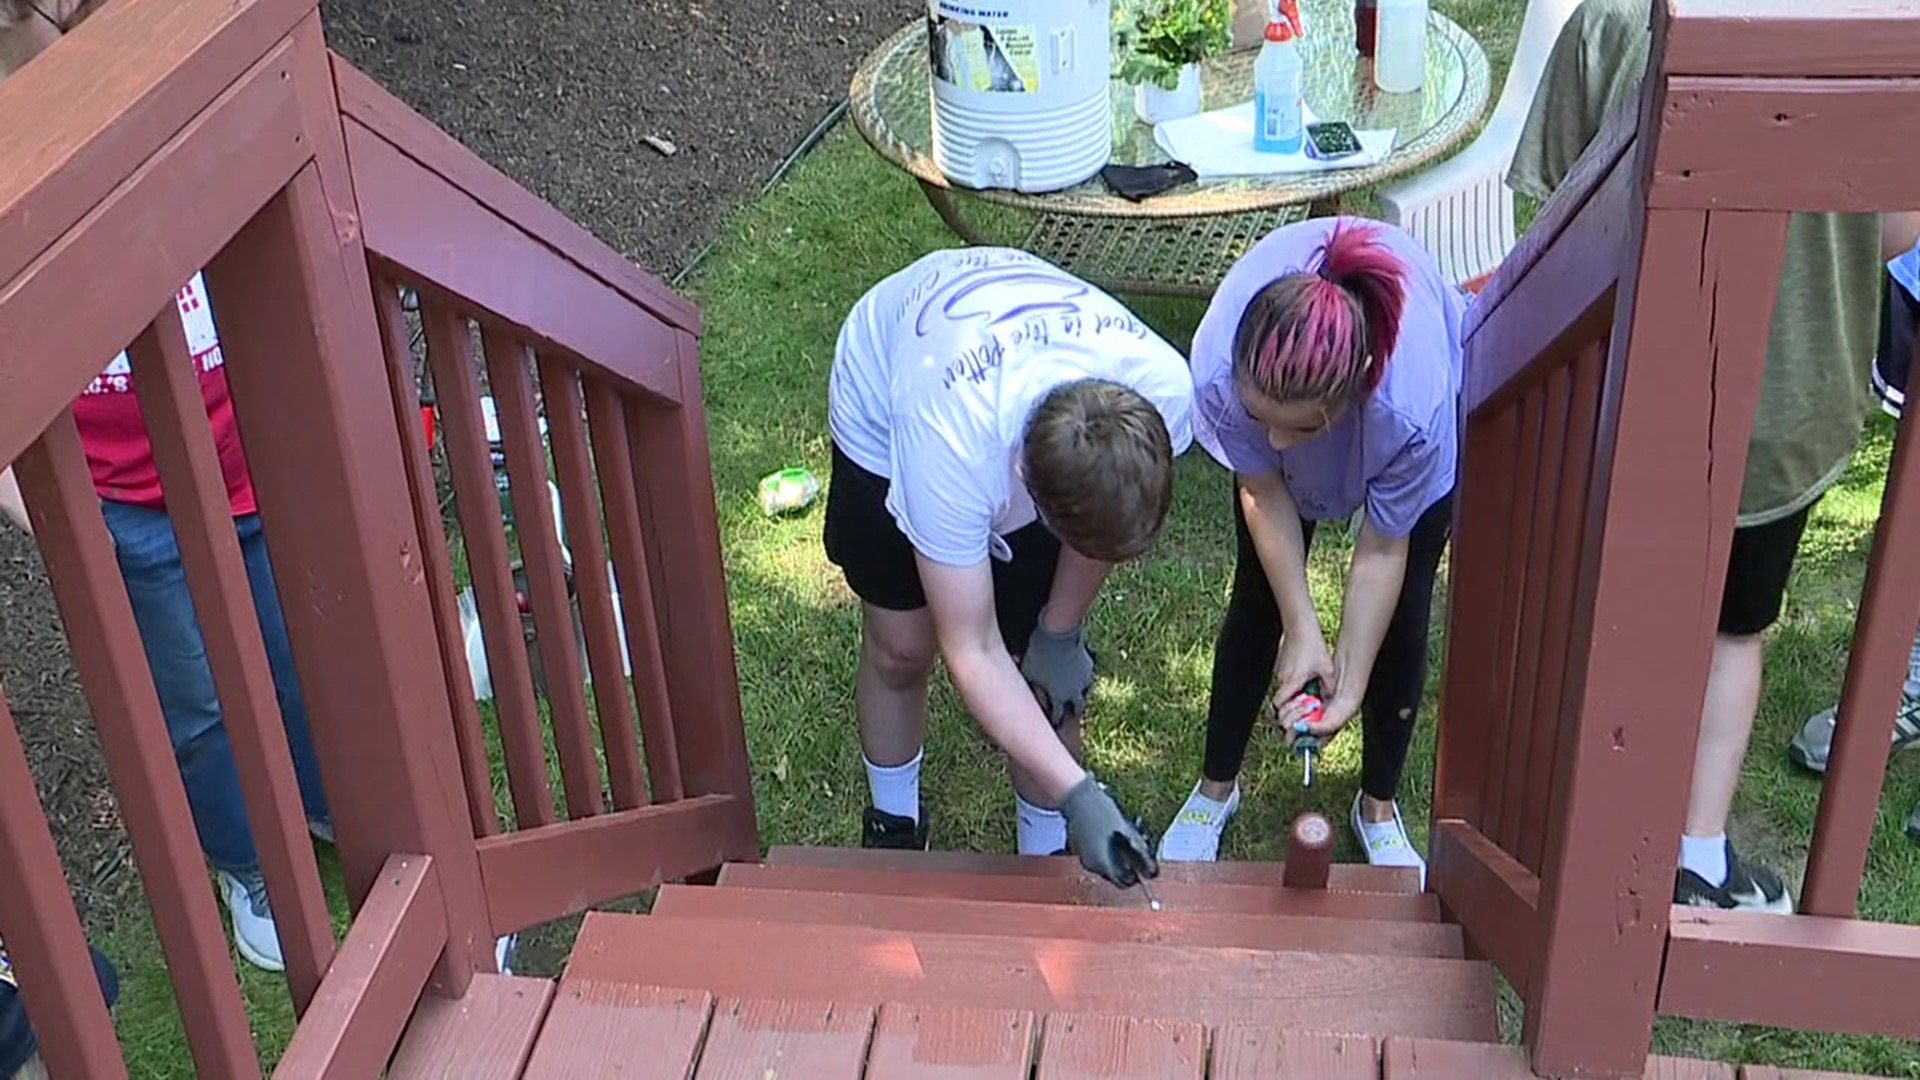 Youth missionaries from six Methodist churches in Pennsylvania and Connecticut are lending a helping hand in our area this week.